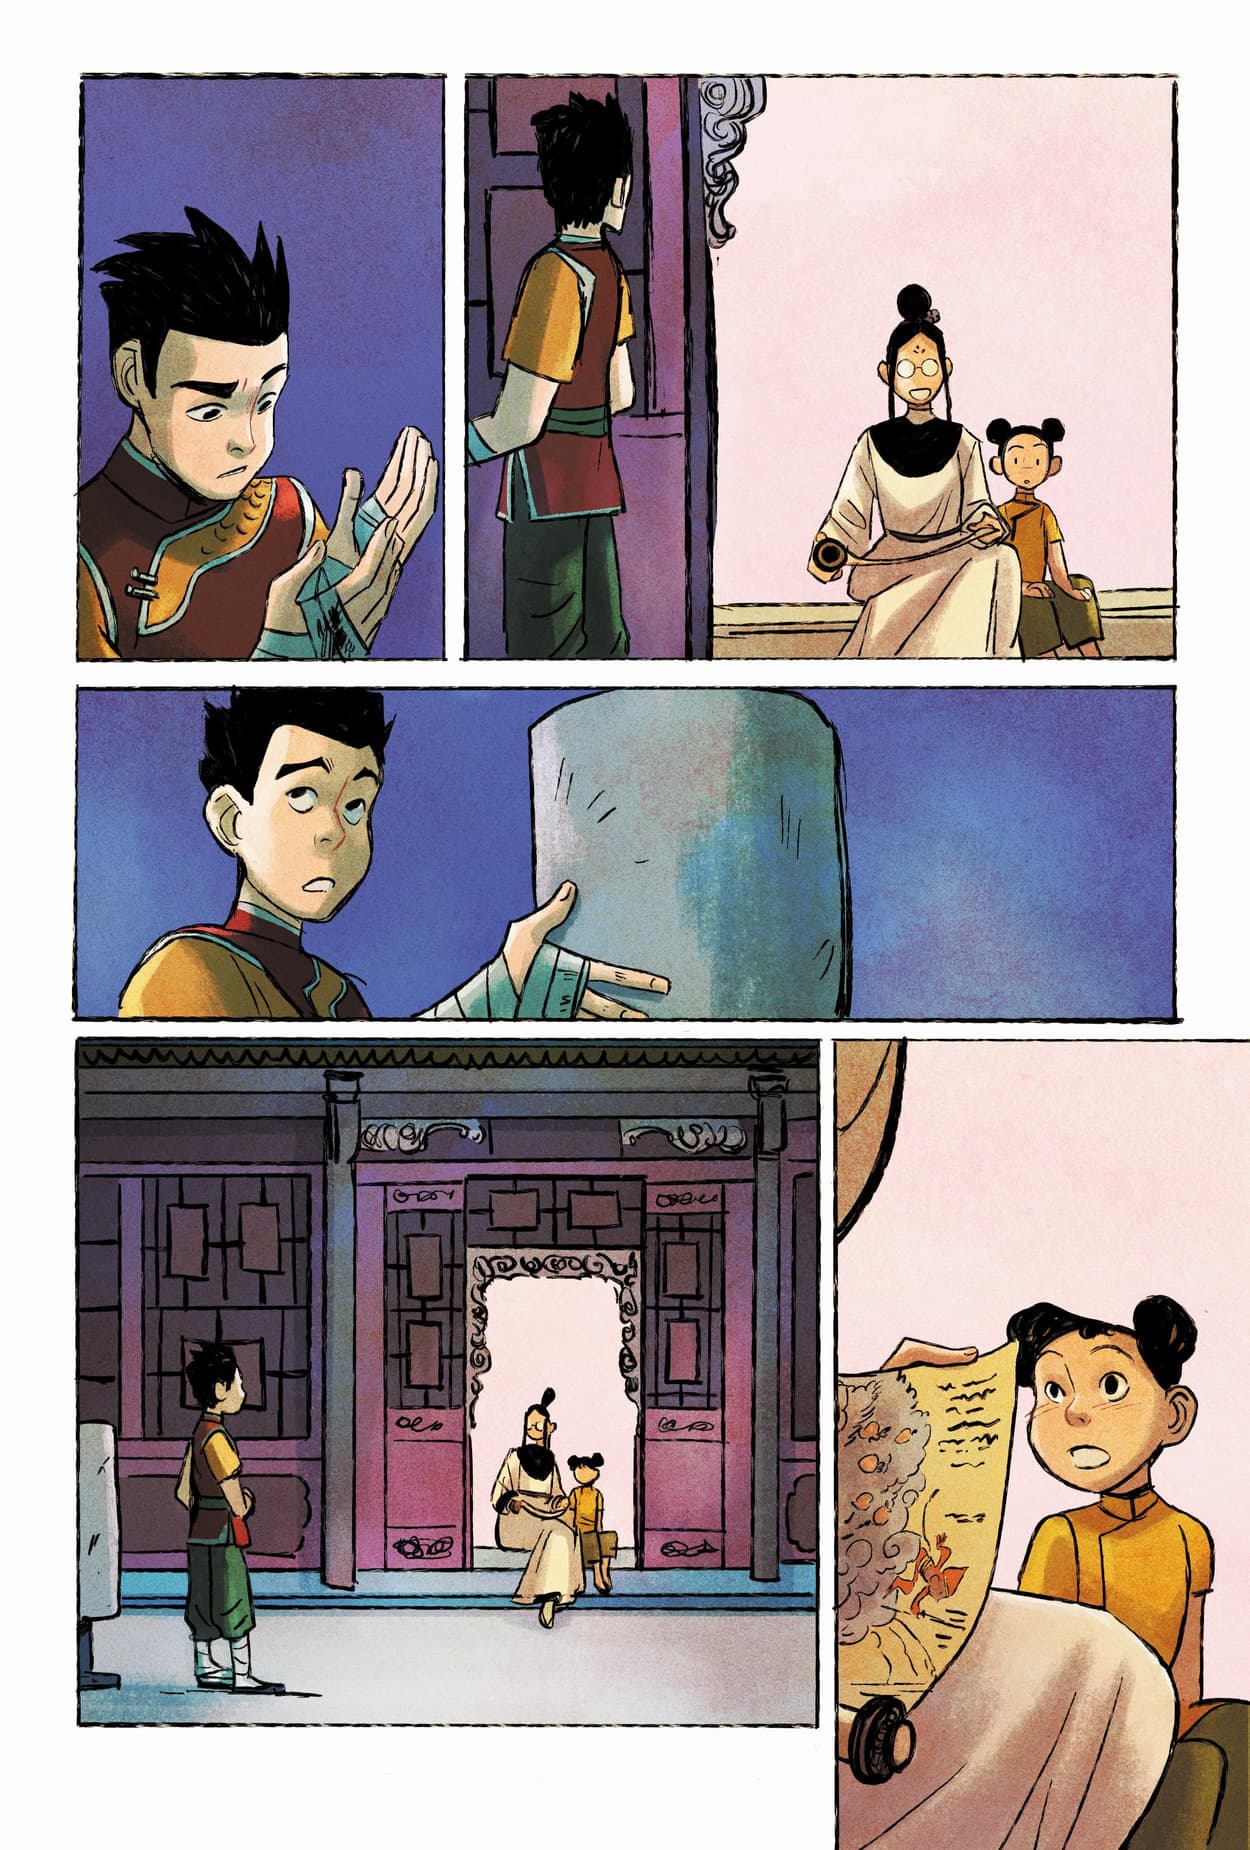 'Shang-Chi and the Quest for Immortality' interior artwork by Victoria Ying and Ian Herring